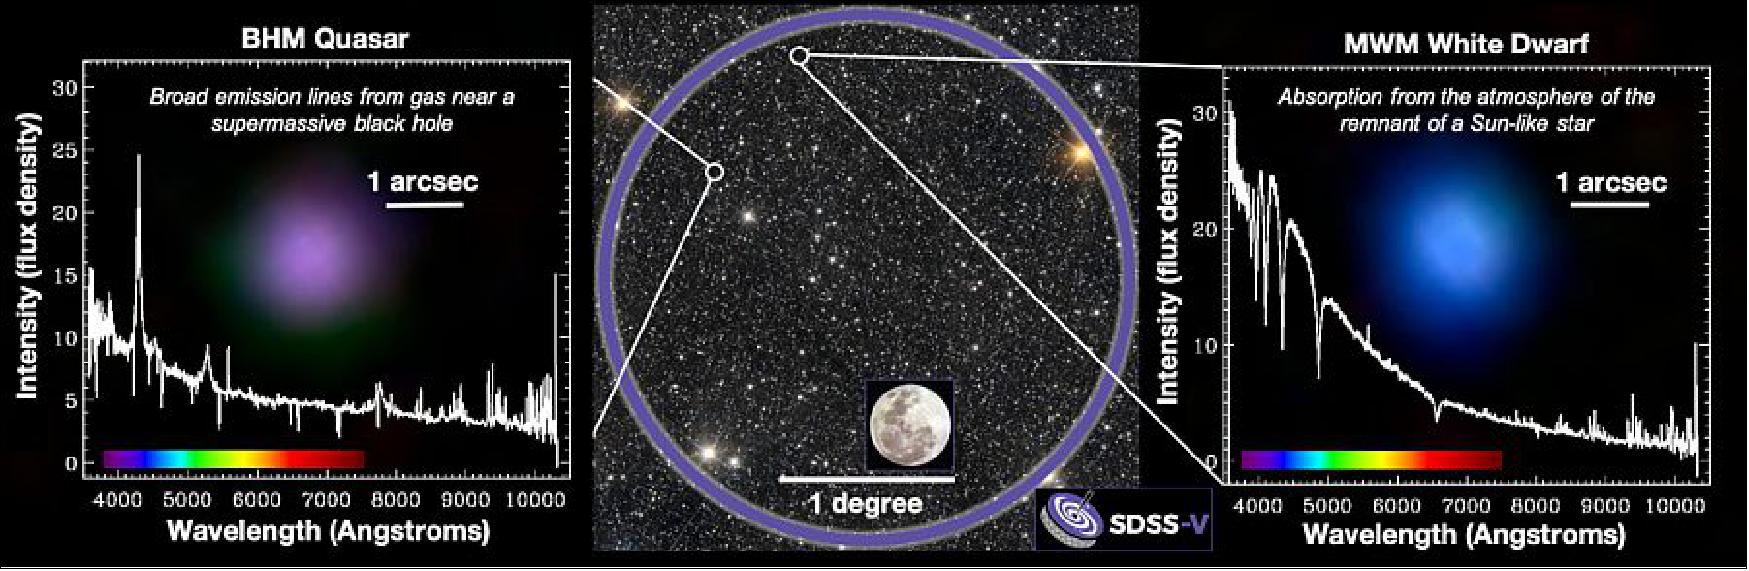 Figure 10: The Sloan Digital Sky Survey’s fifth generation made its first observations earlier this month. This image shows a sampling of data from those first SDSS-V data. The central sky image is a single field of SDSS-V observations. The purple circle indicates the telescope’s field-of-view on the sky, with the full Moon shown as a size comparison. SDSS-V simultaneously observes 500 targets at a time within a circle of this size. The left panel shows the optical-light spectrum of a quasar–a supermassive black hole at the center of a distant galaxy, which is surrounded by a disk of hot, glowing gas. The purple blob is an SDSS image of the light from this disk, which in this dataset spans about 1 arcsecond on the sky, or the width of a human hair as seen from about 21 meters (63 feet) away. The right panel shows the image and spectrum of a white dwarf –the left-behind core of a low-mass star (like the Sun) after the end of its life [image credit: Hector Ibarra Medel, Jon Trump, Yue Shen, Gail Zasowski, and the SDSS-V Collaboration. Central background image: unWISE / NASA/JPL-Caltech / D. Lang (Perimeter Institute)]